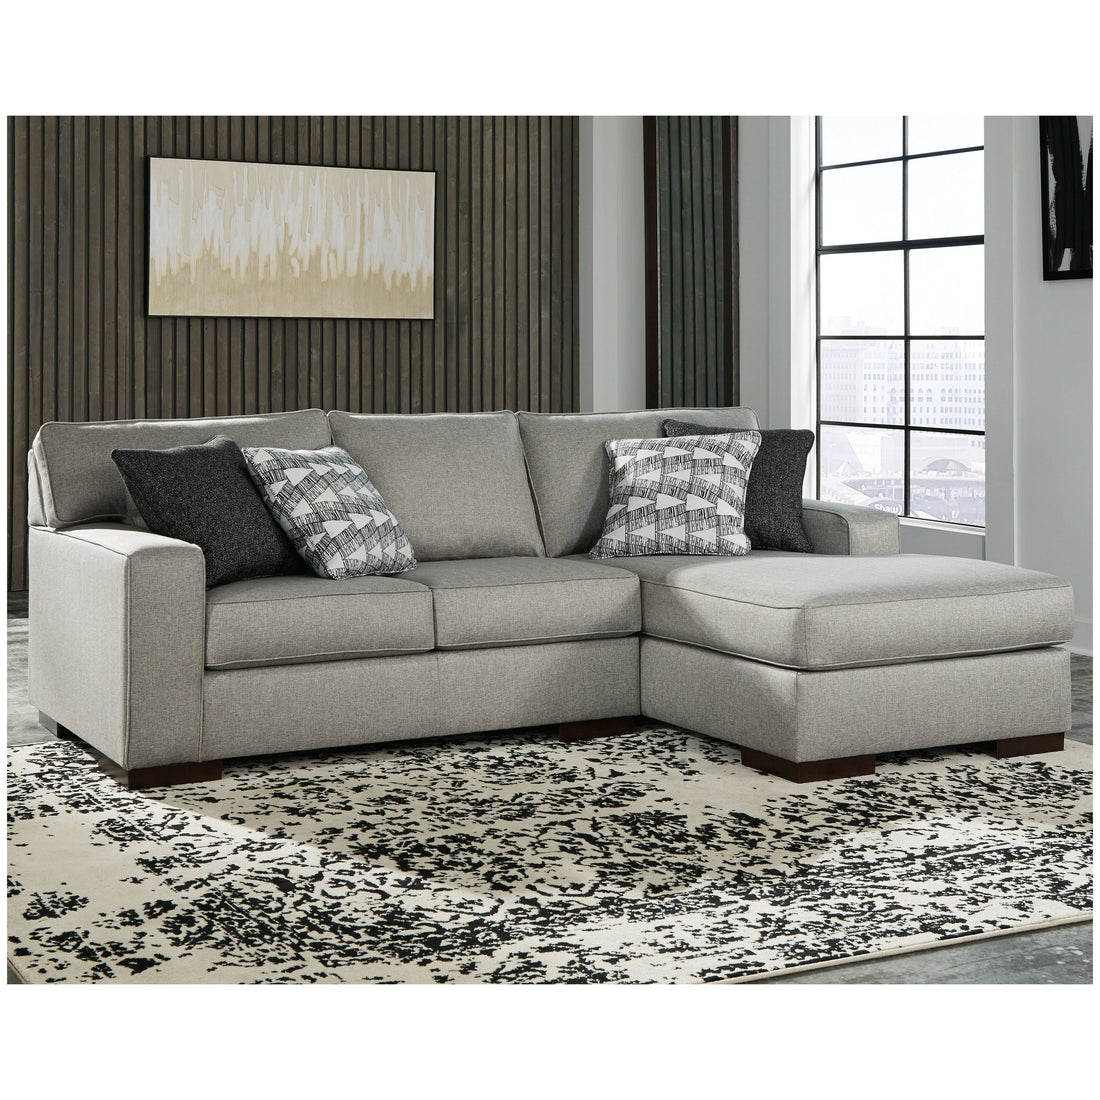 Marsing Nuvella 2-Piece Sectional with Chaise Ash-41902S2